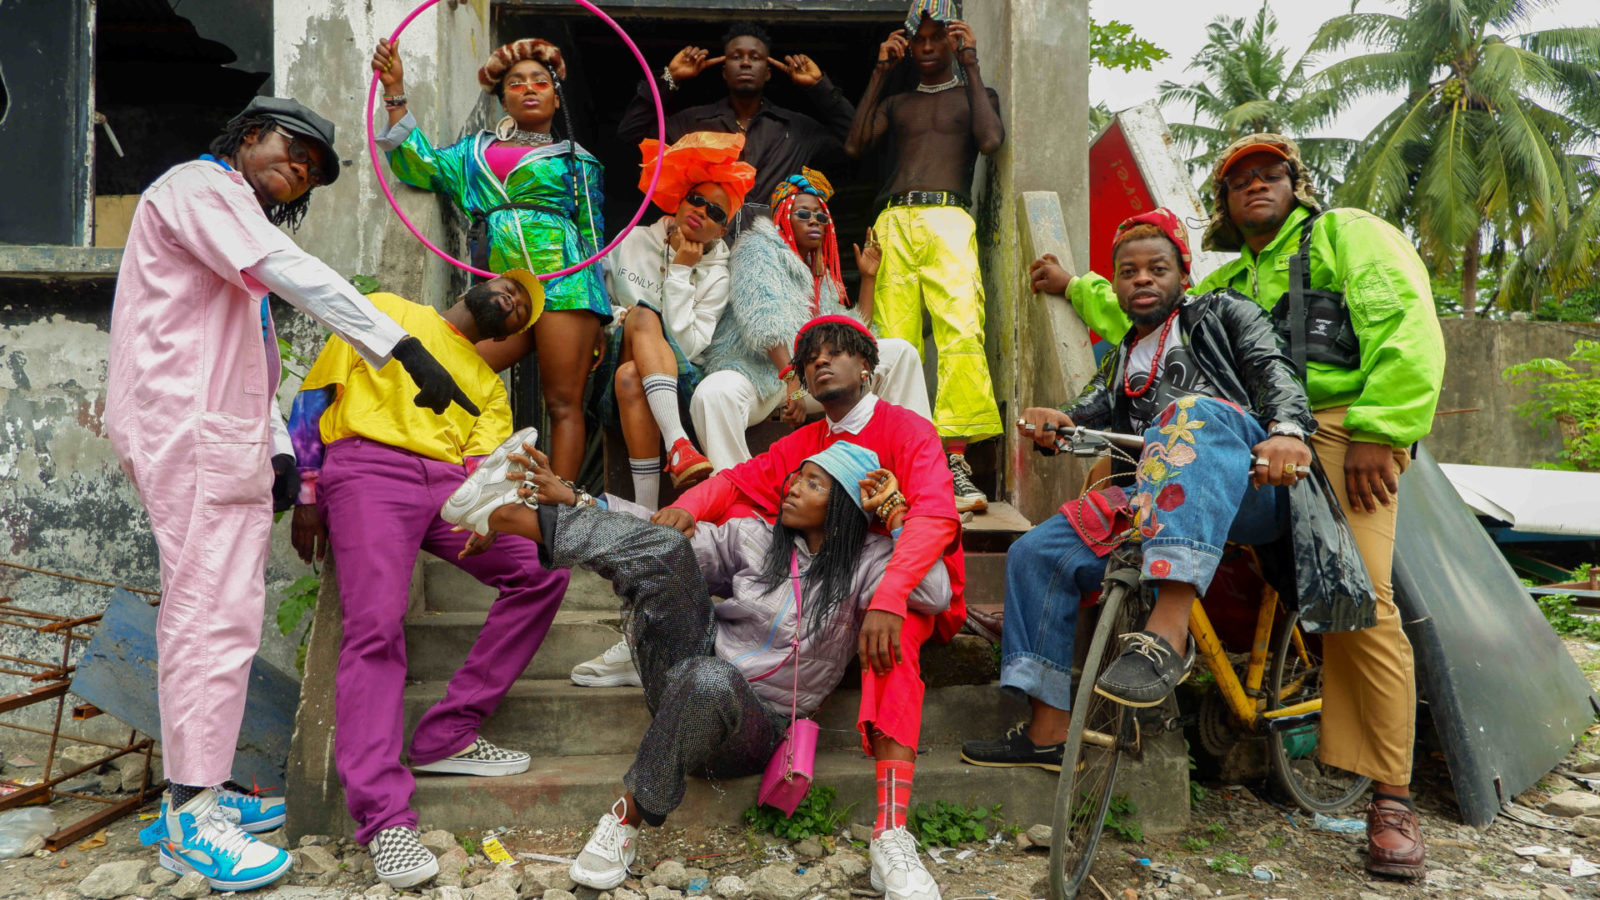 Performers from QDance Company in Lagos, Nigeria, gather on the steps of a house in brilliantly colorful contemporary clothing.